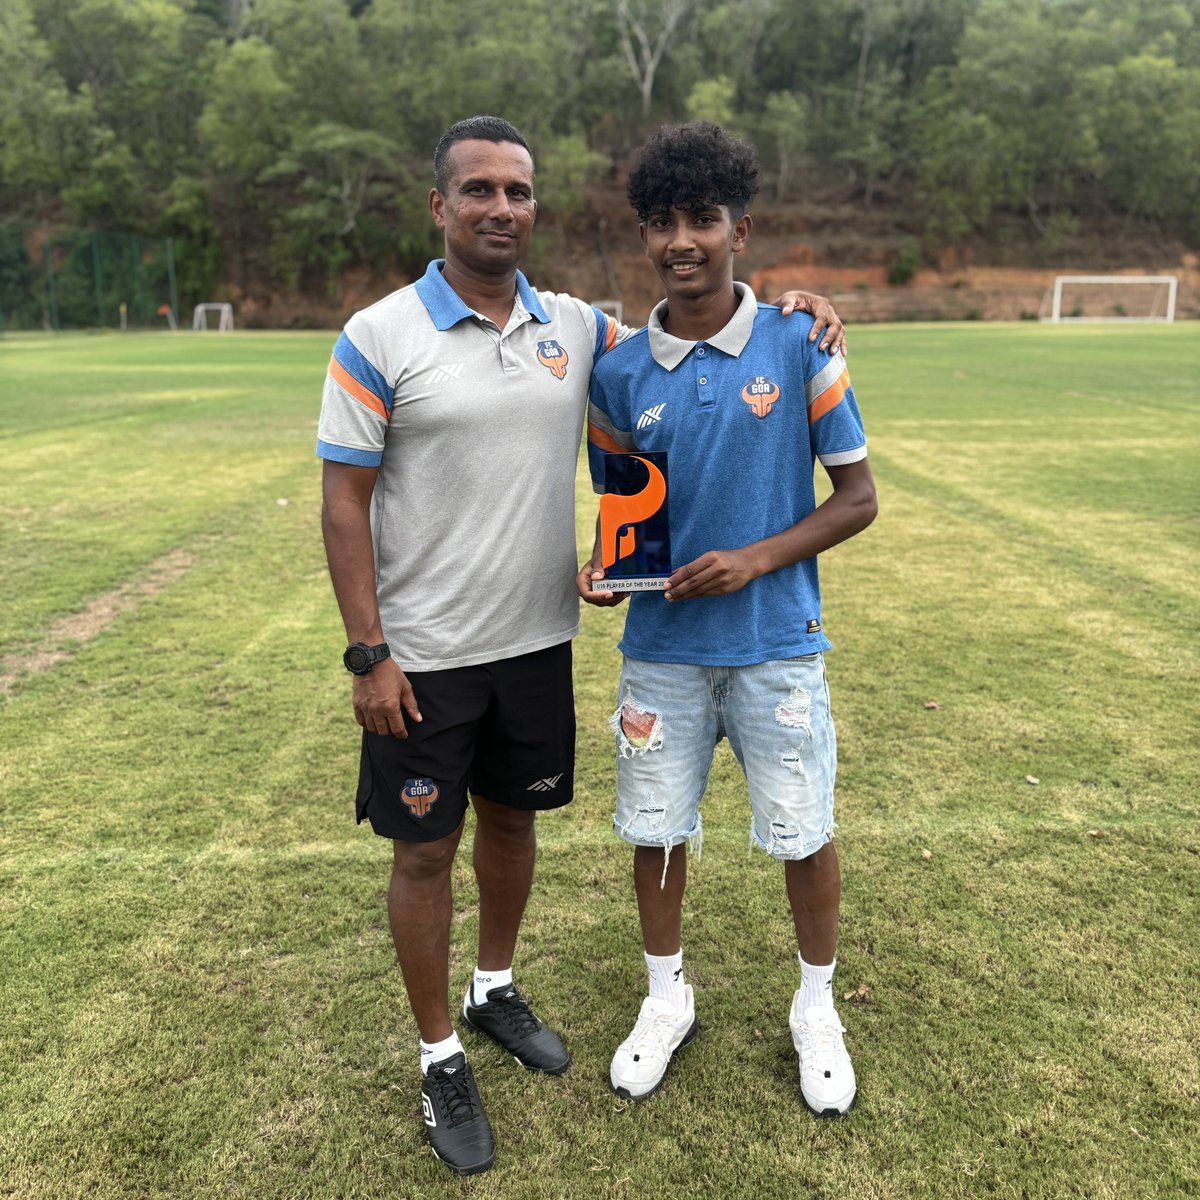 Congratulations to Cain Fernandes for winning the 2023-24 Club Award U19 Player of the Season! 🔥 Cain played 25 games and scored 10 goals across all competitions. He plays as a winger and is known for his speed, ability to deliver effective crosses into the box and lethal